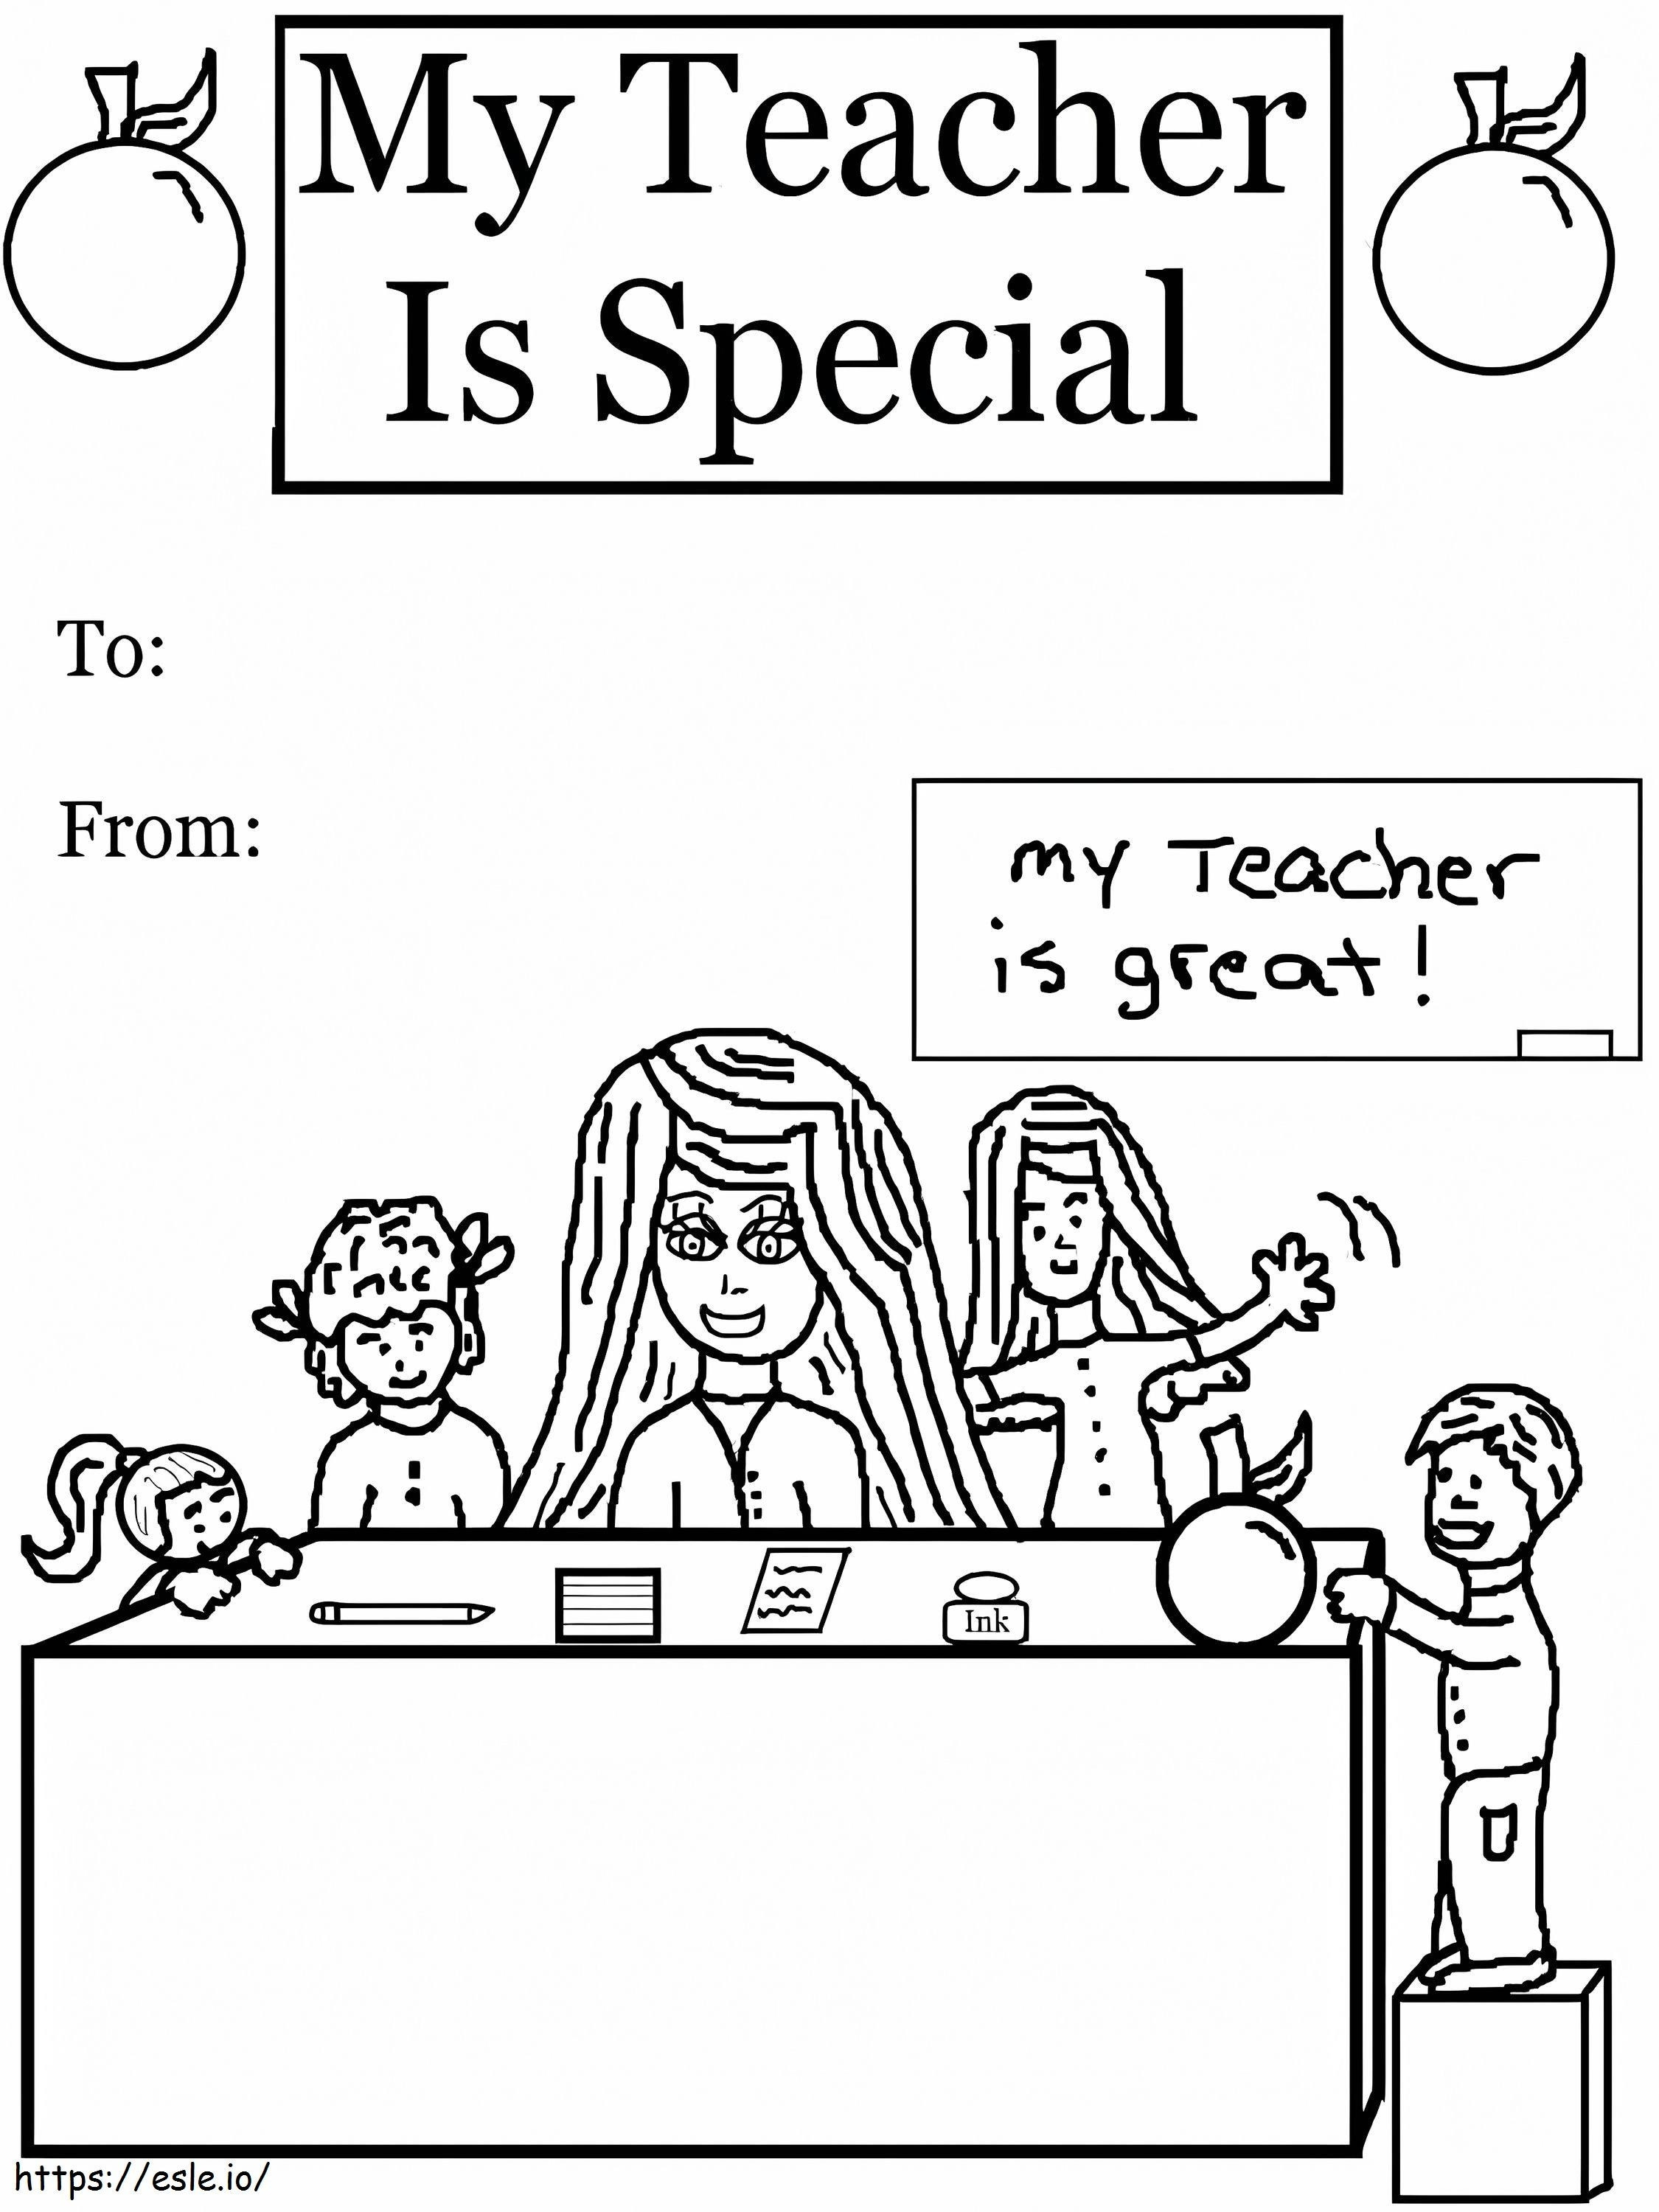 My Teacher Is Special coloring page